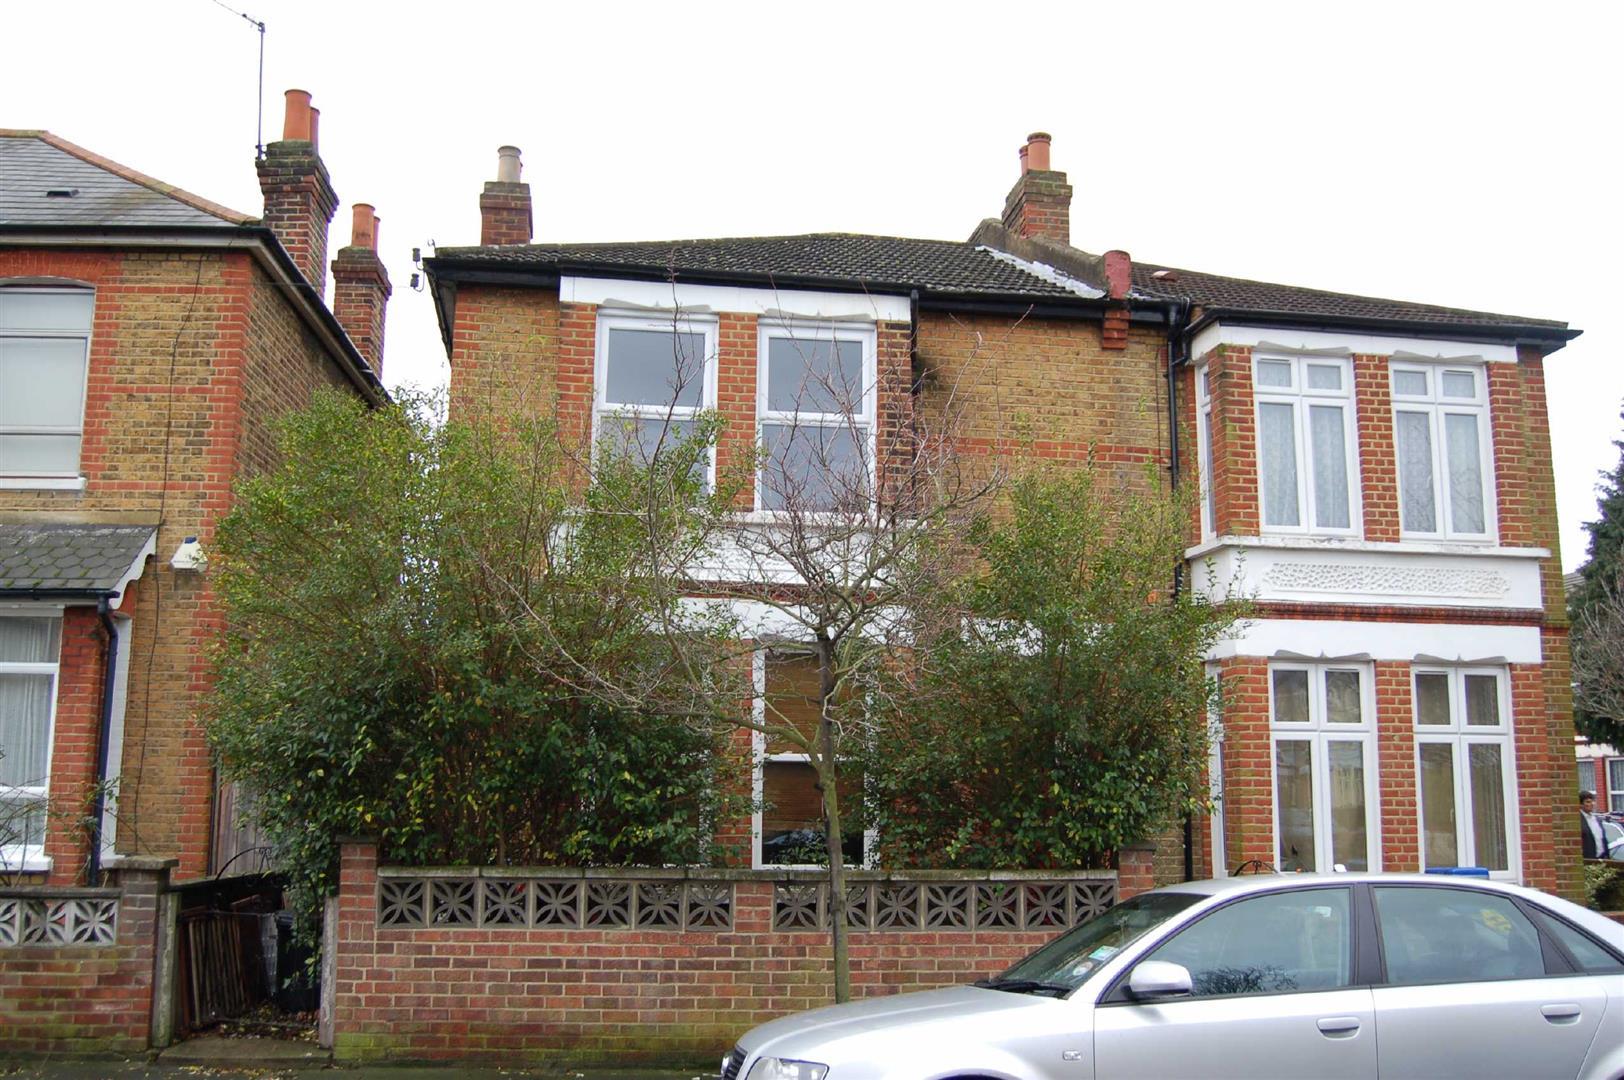 Harewood Road, Colliers Wood